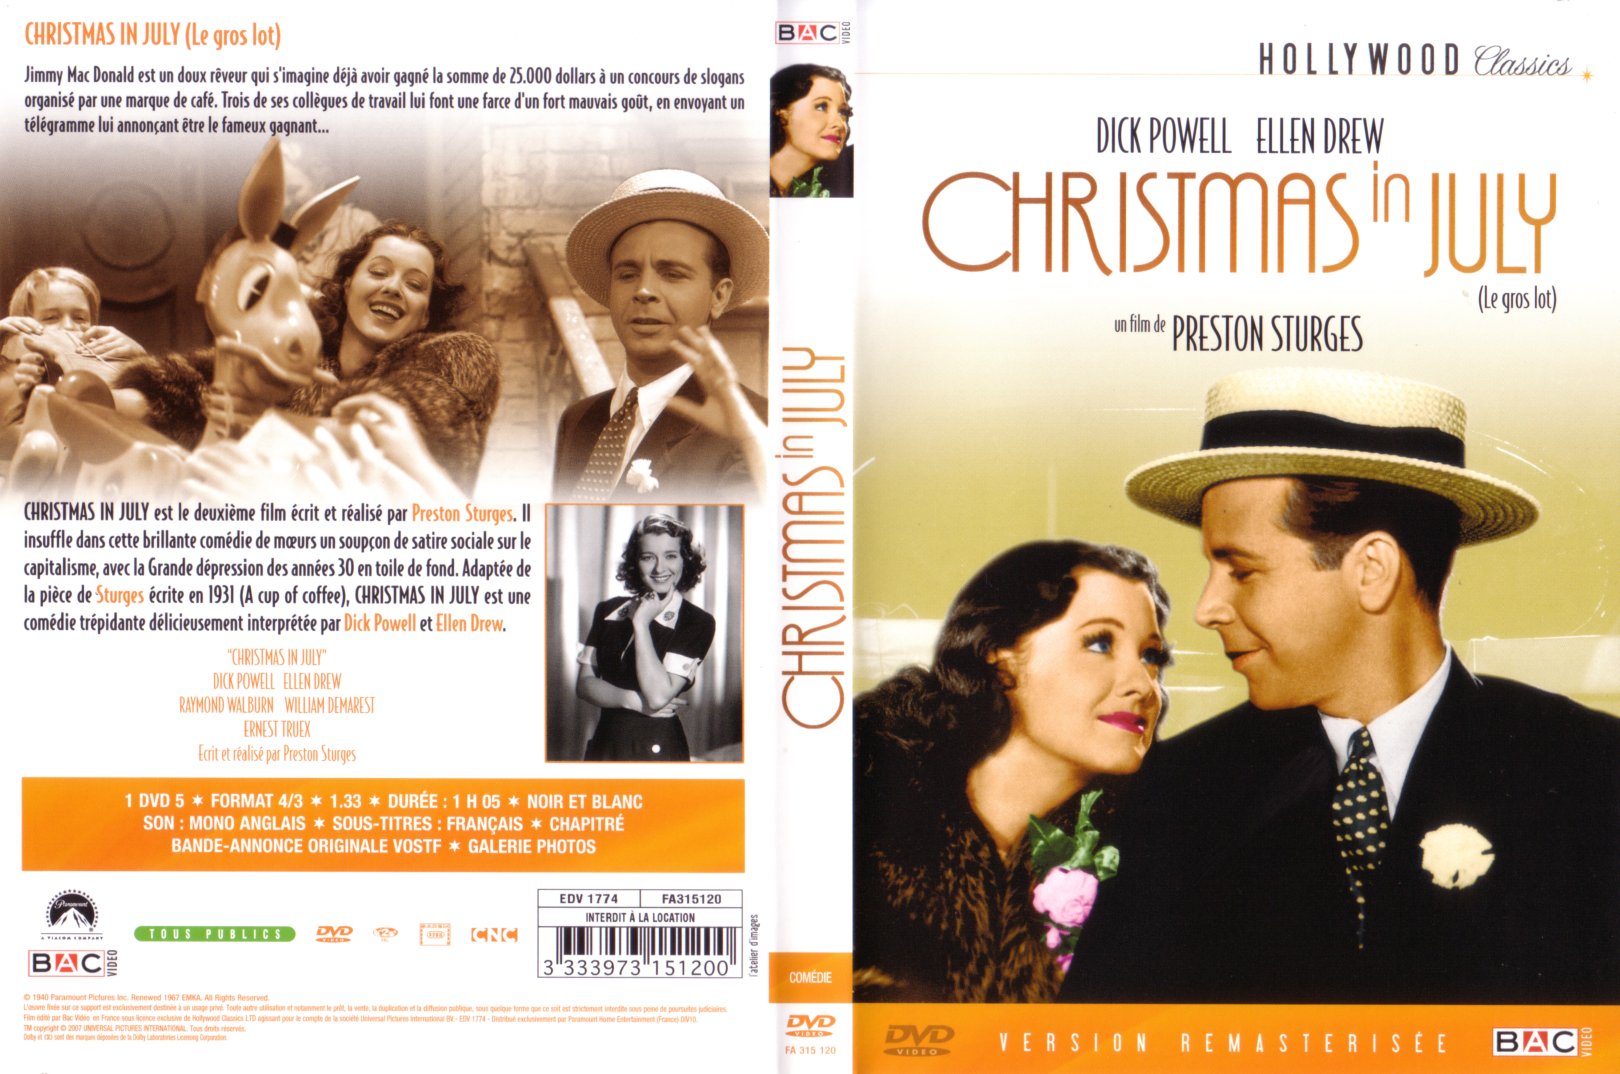 Jaquette DVD Christmas in july